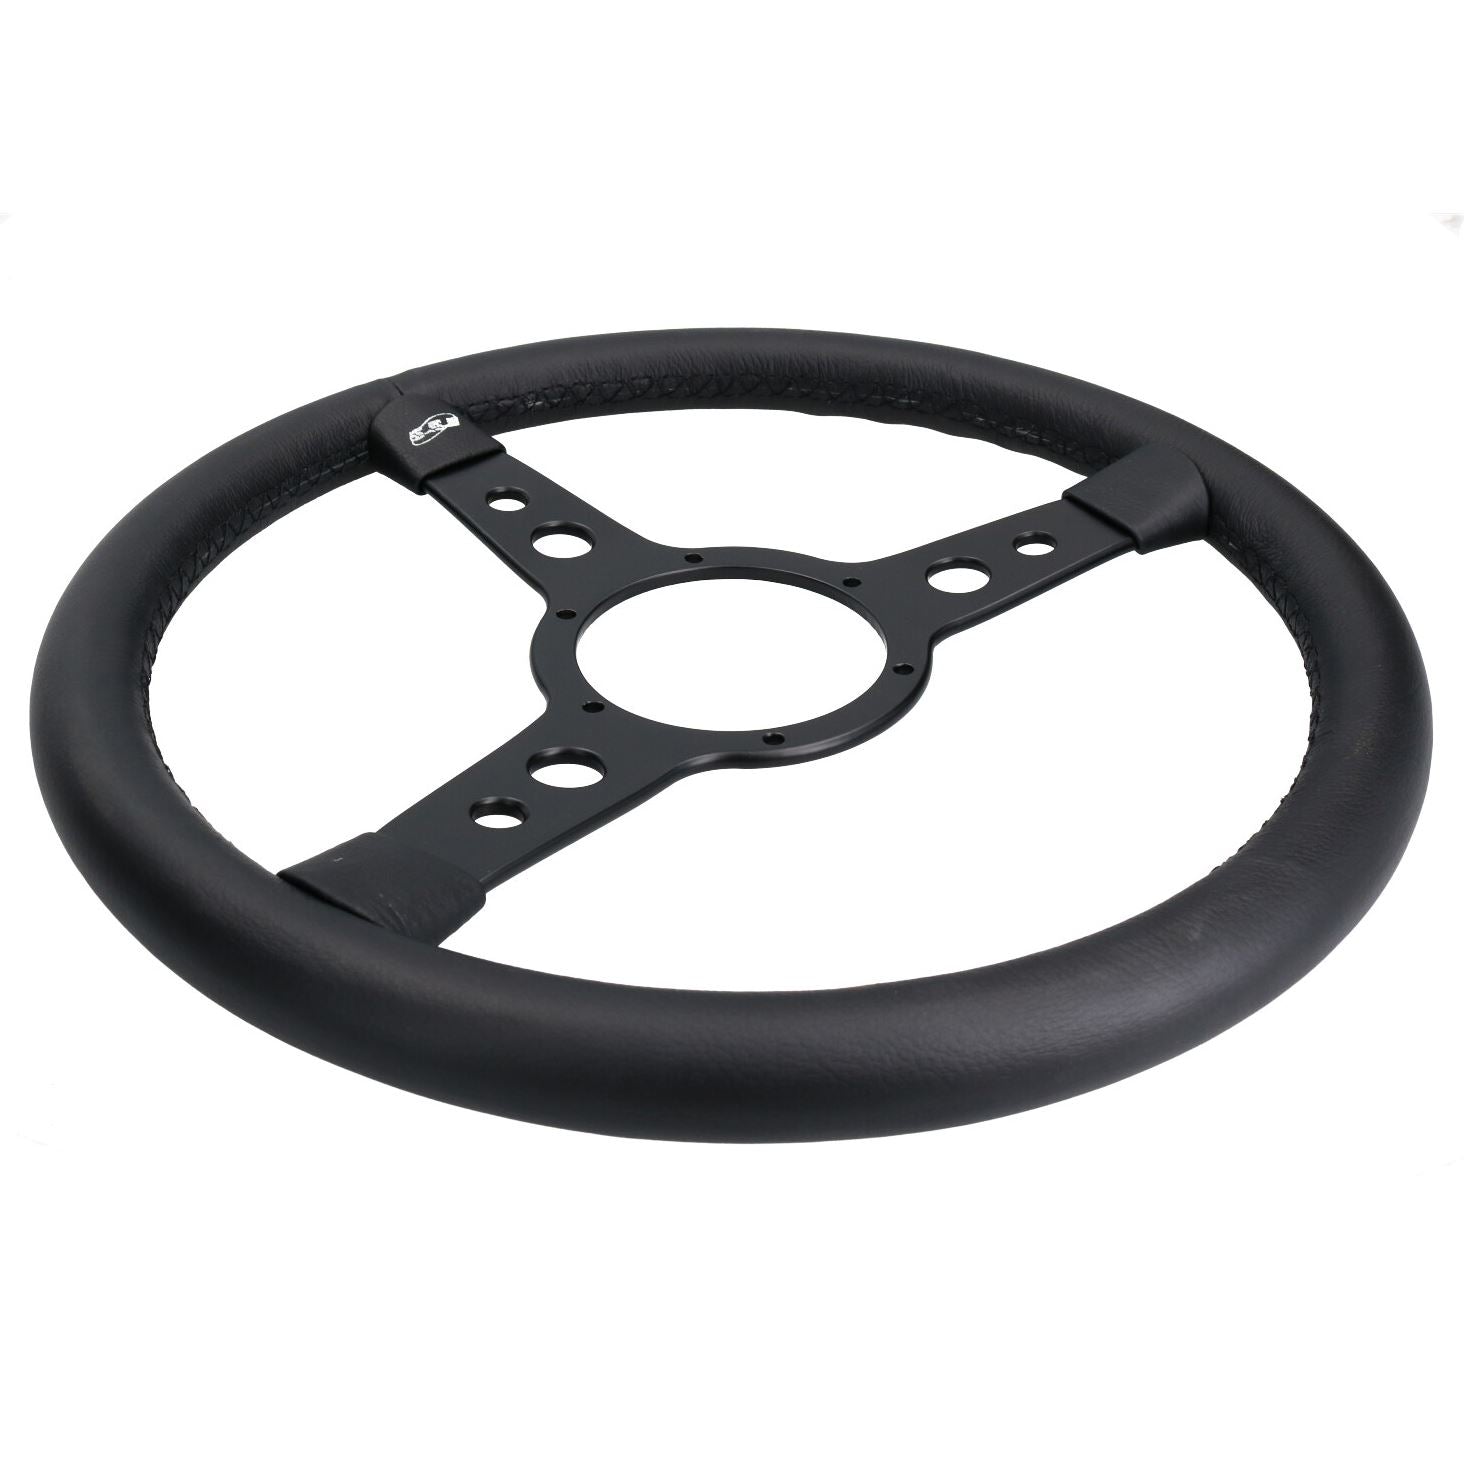 15" Traditional Classic Car Steering Wheel Black Leather 3 Spoke Centre 6 Hole